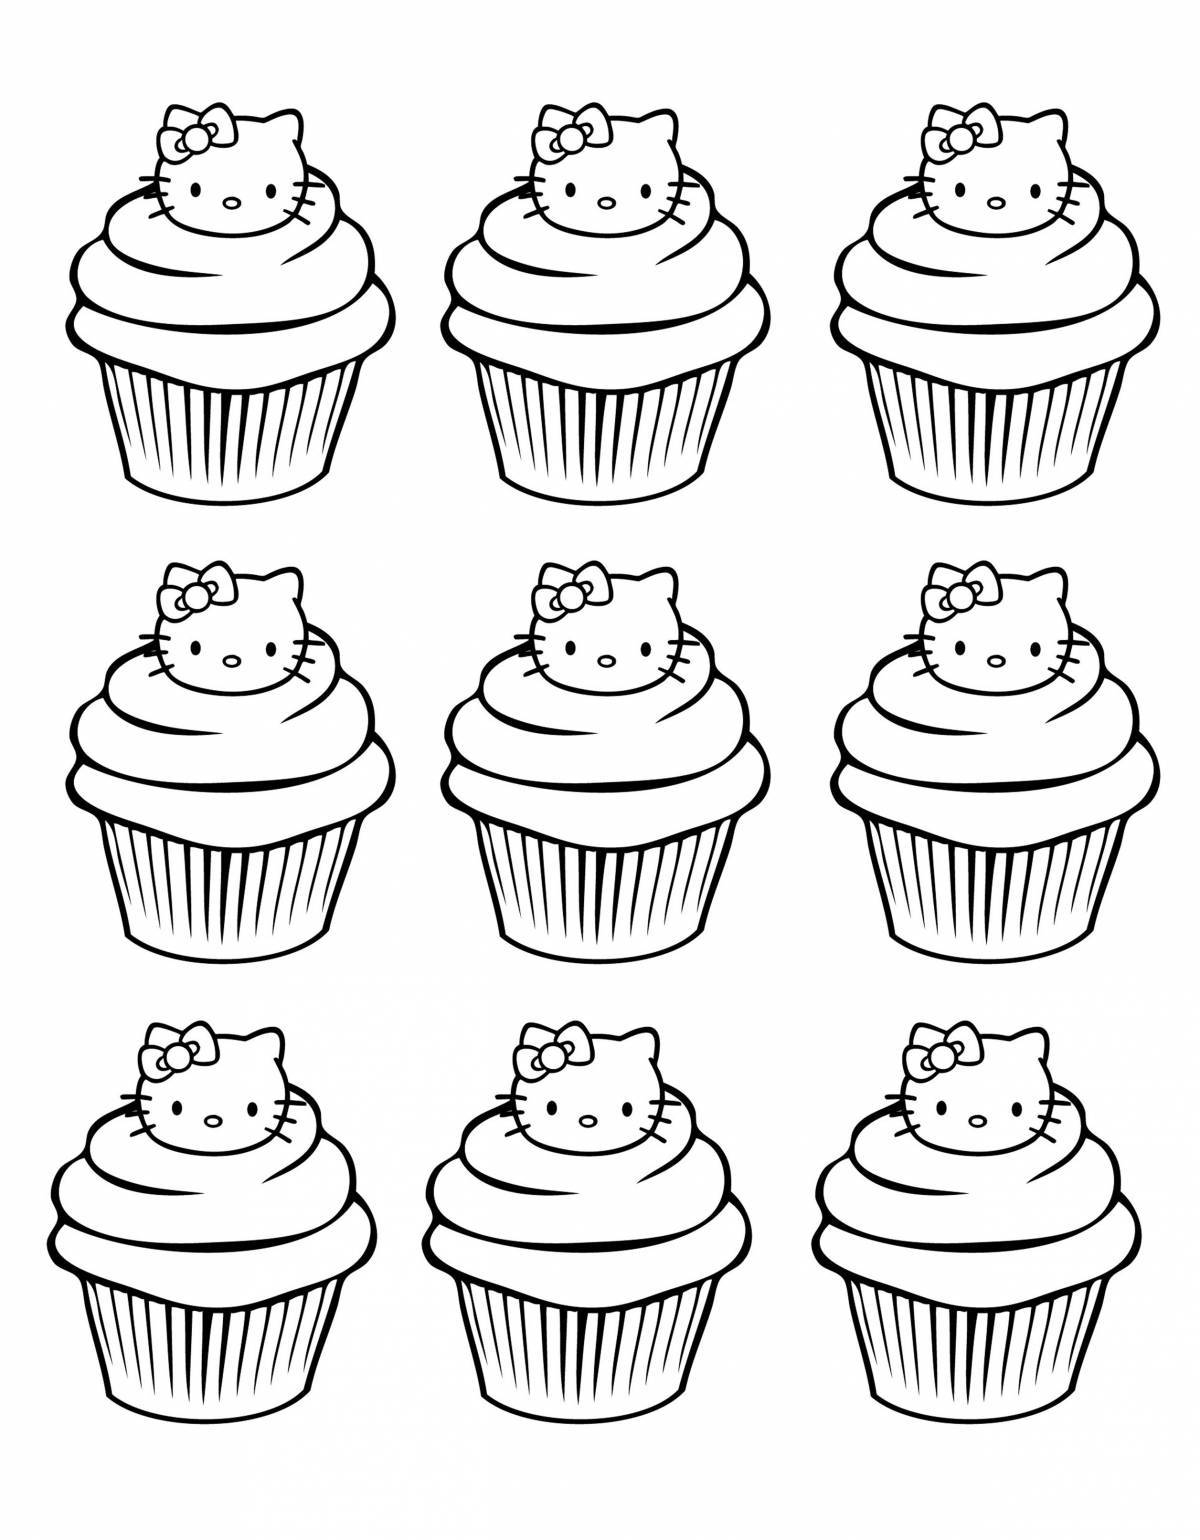 Charming stickers for coloring